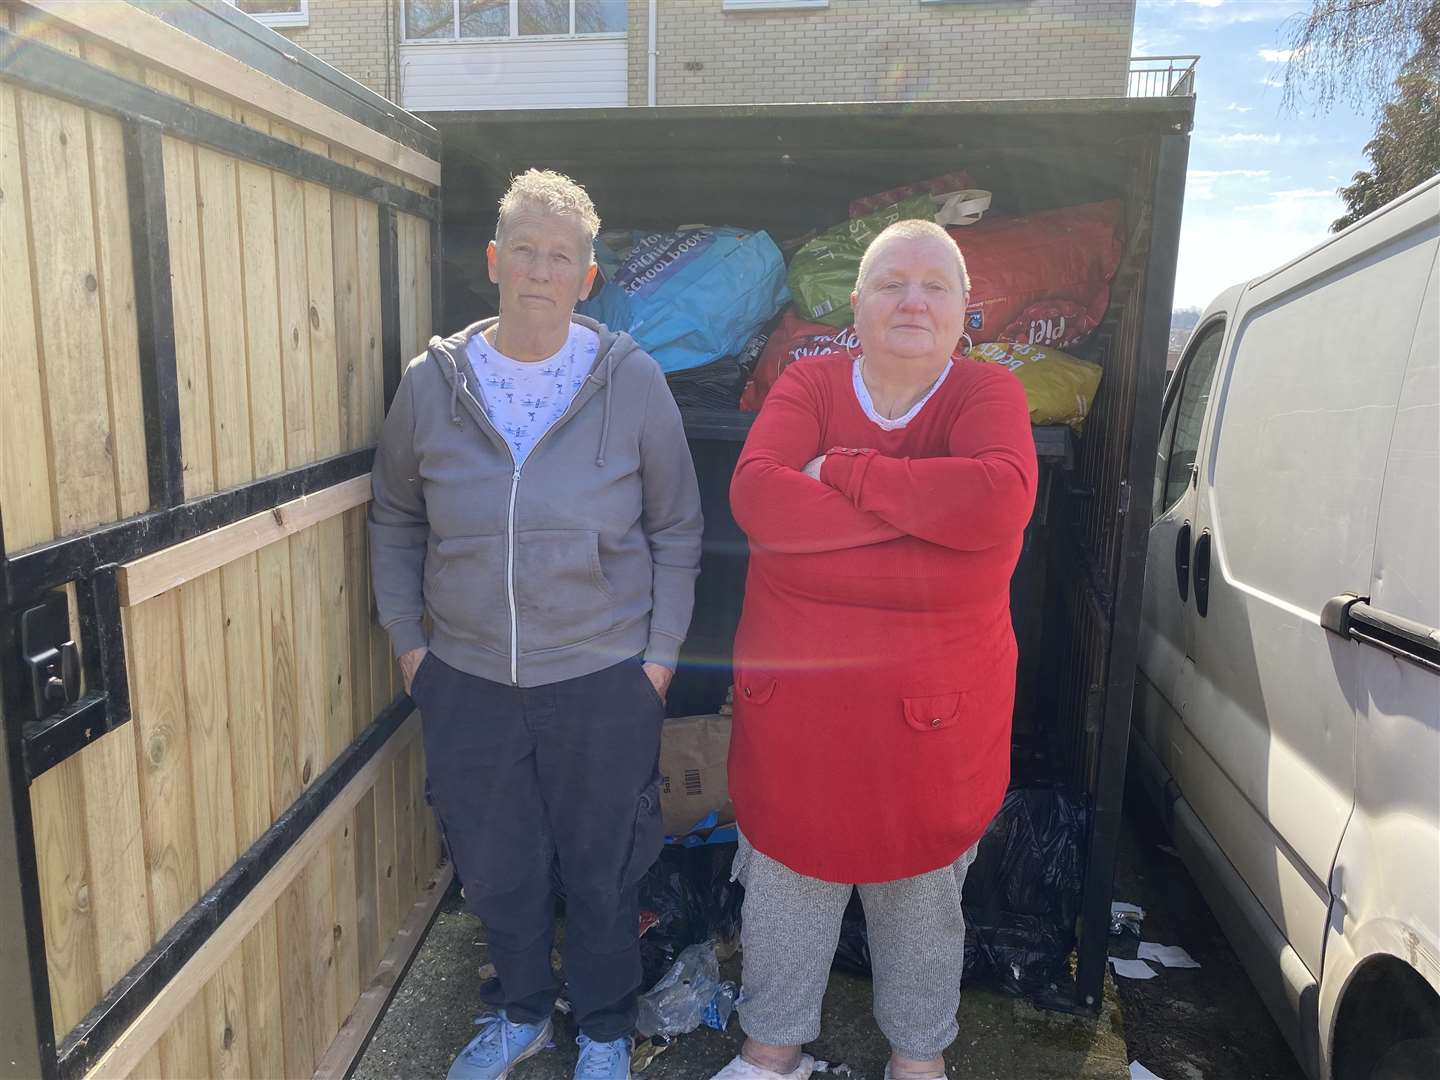 Carol Mitchell and her neighbour Lynn Kember waited for months for their rubbish to be collected